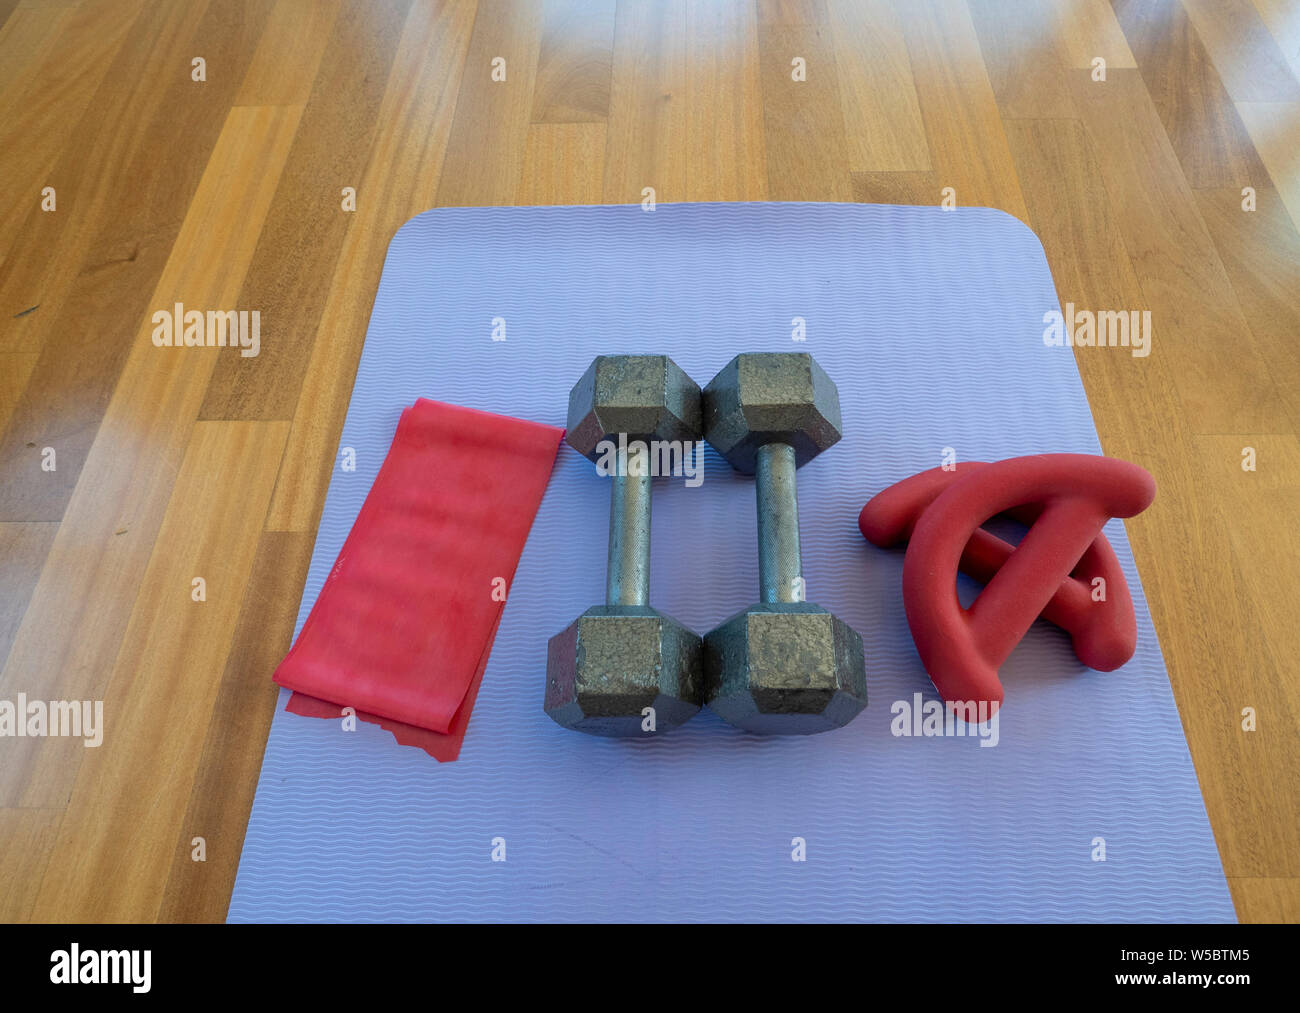 Overhead view of a pair of dumbbells, theraband exercise bands, and a yoga mat on hardwood floor Stock Photo